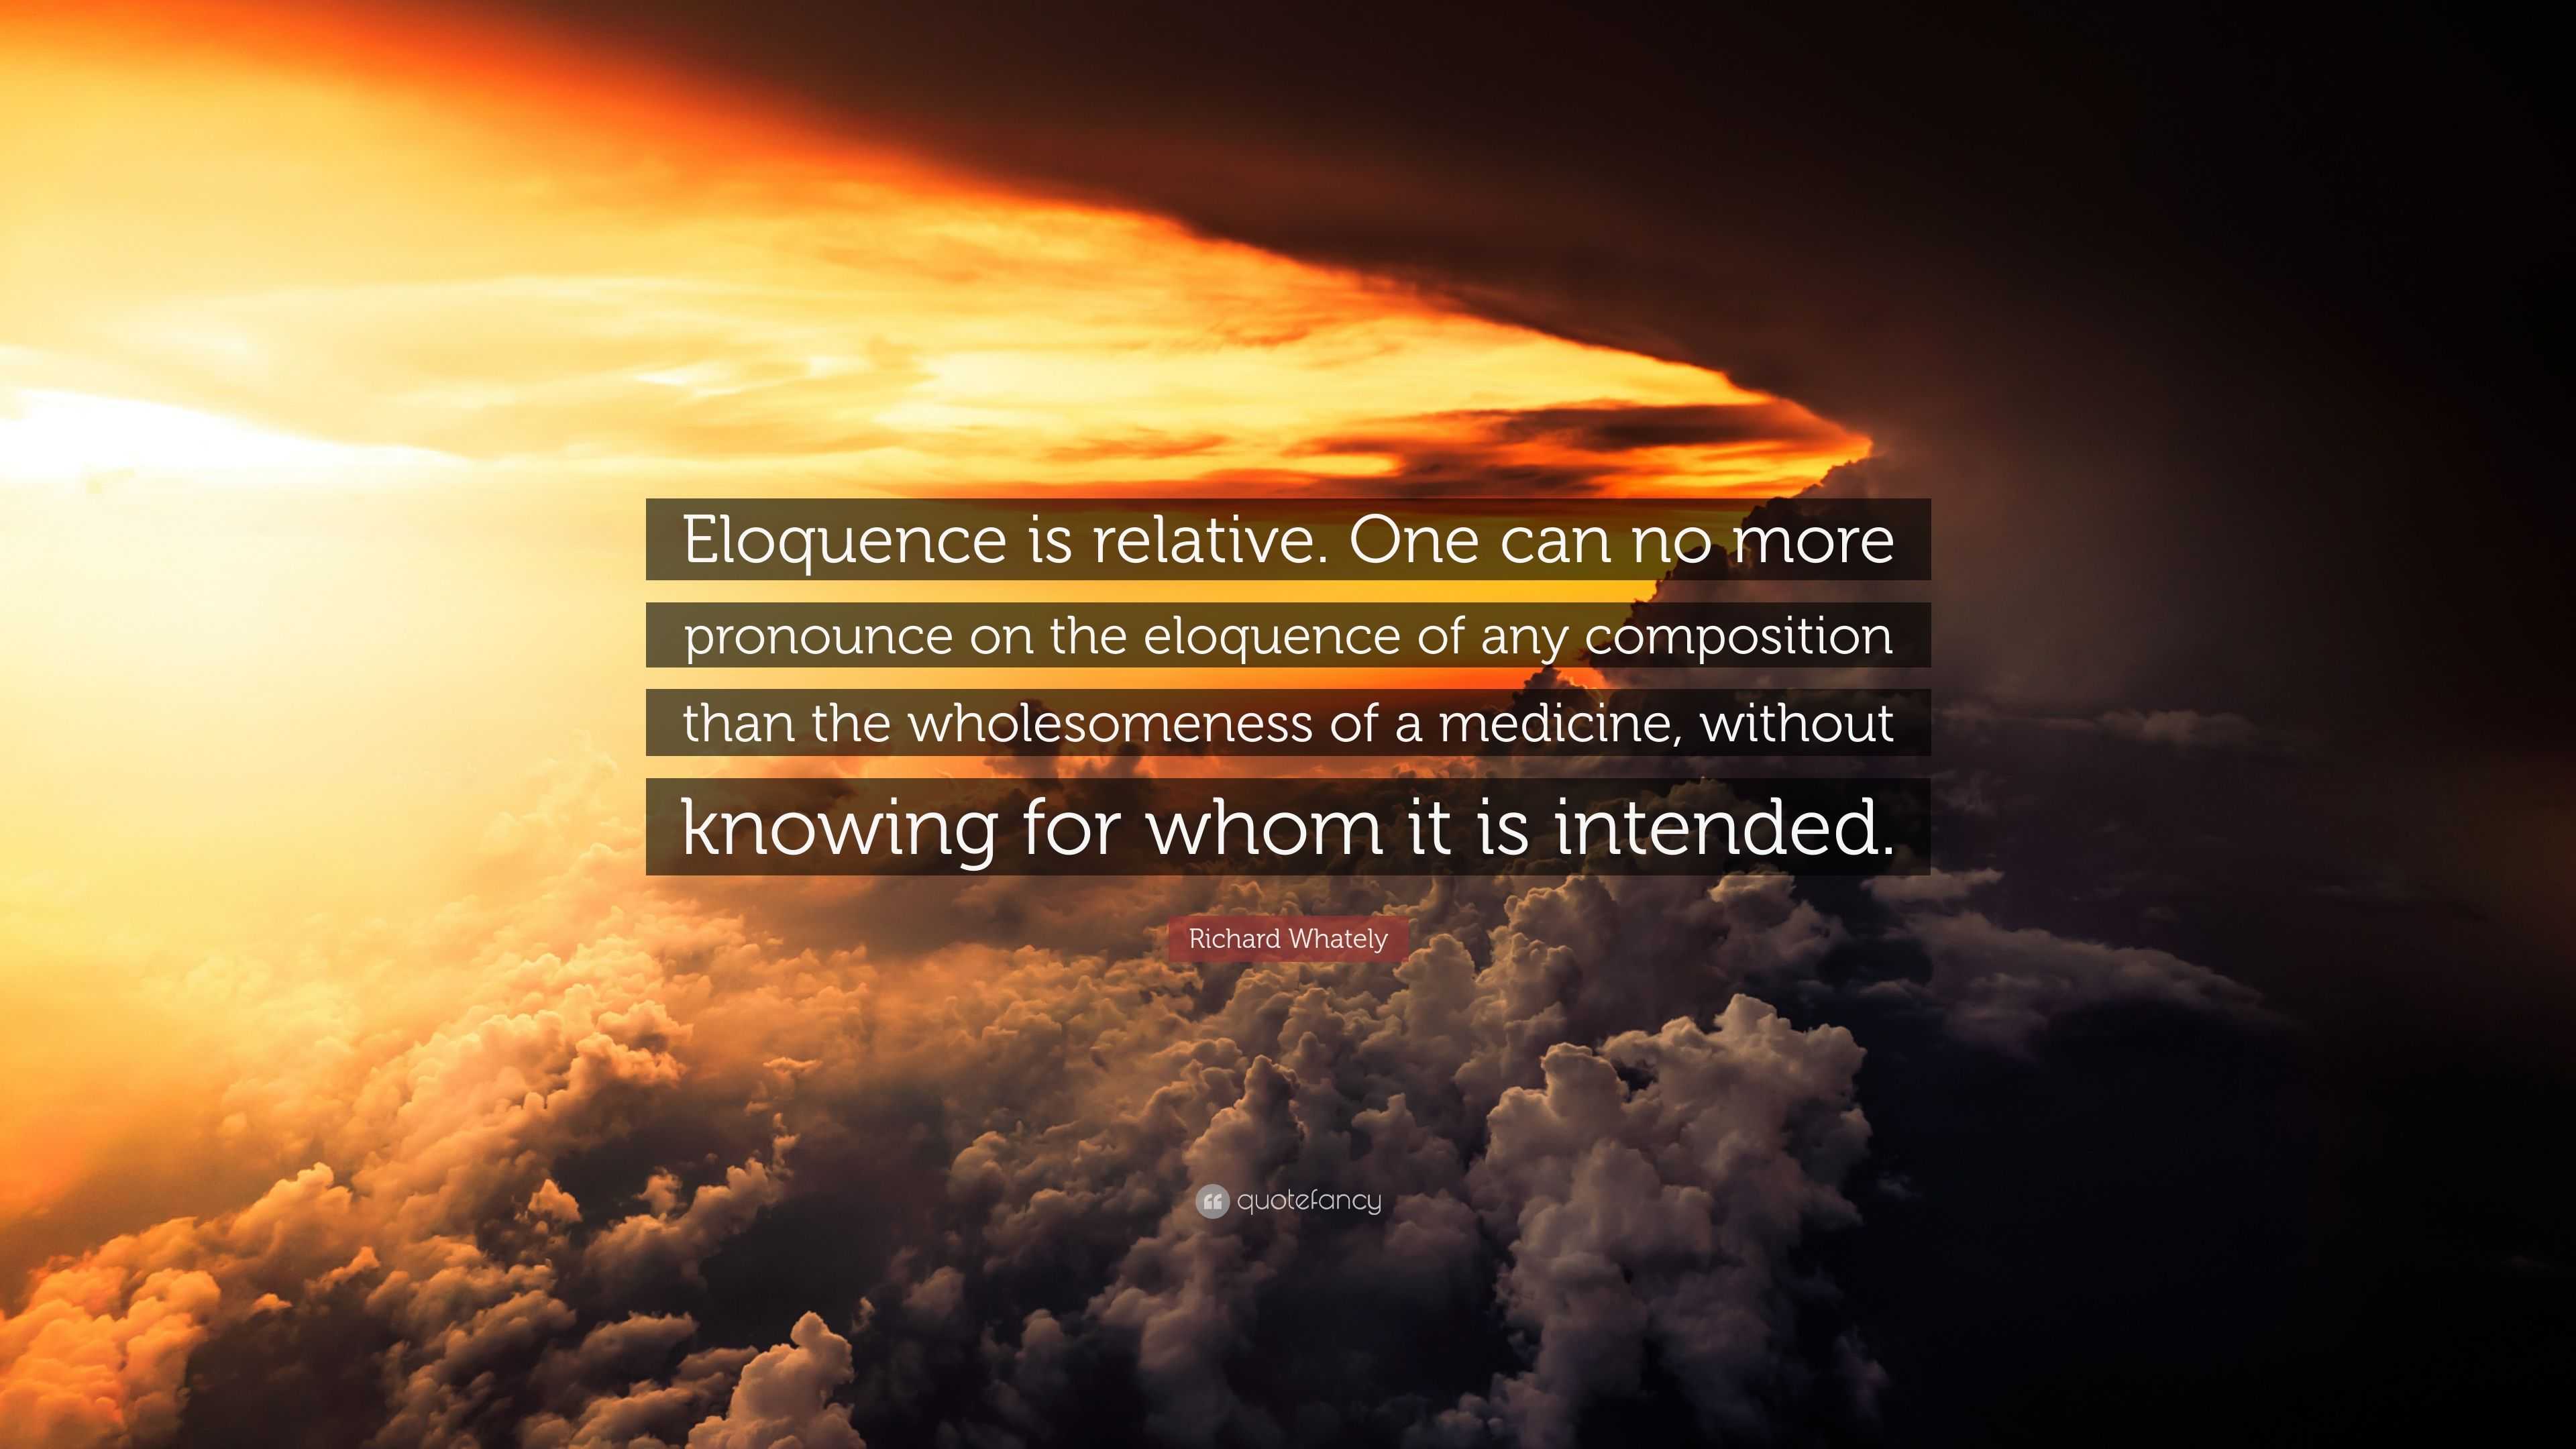 Richard Whately Quote: “Eloquence is relative. One can no more